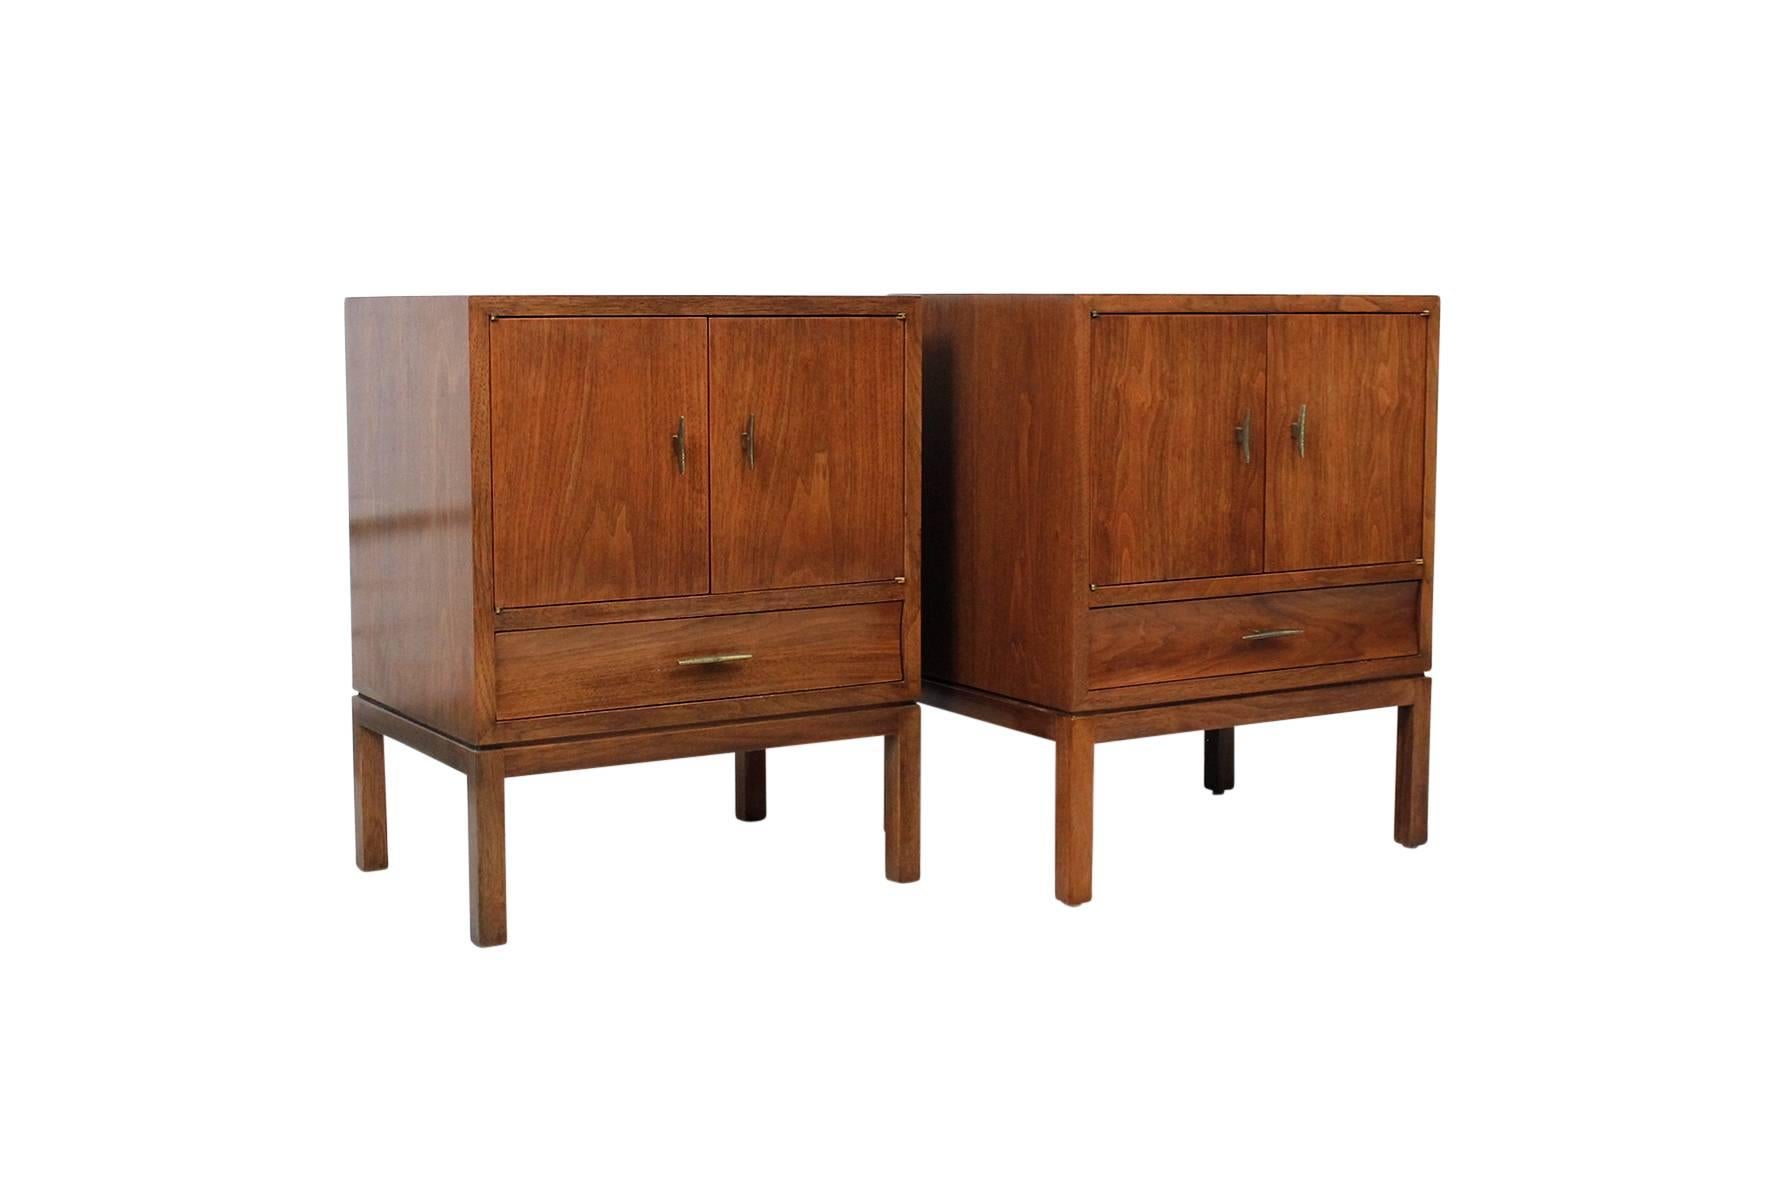 Pair of nightstands by American designer Edward Wormley for Dunbar. These nightstands feature oiled walnut cases, brass pulls, and white laminate drawer bottoms. Useful form with a variety of storage options. Labeled with brass Dunbar decals in the